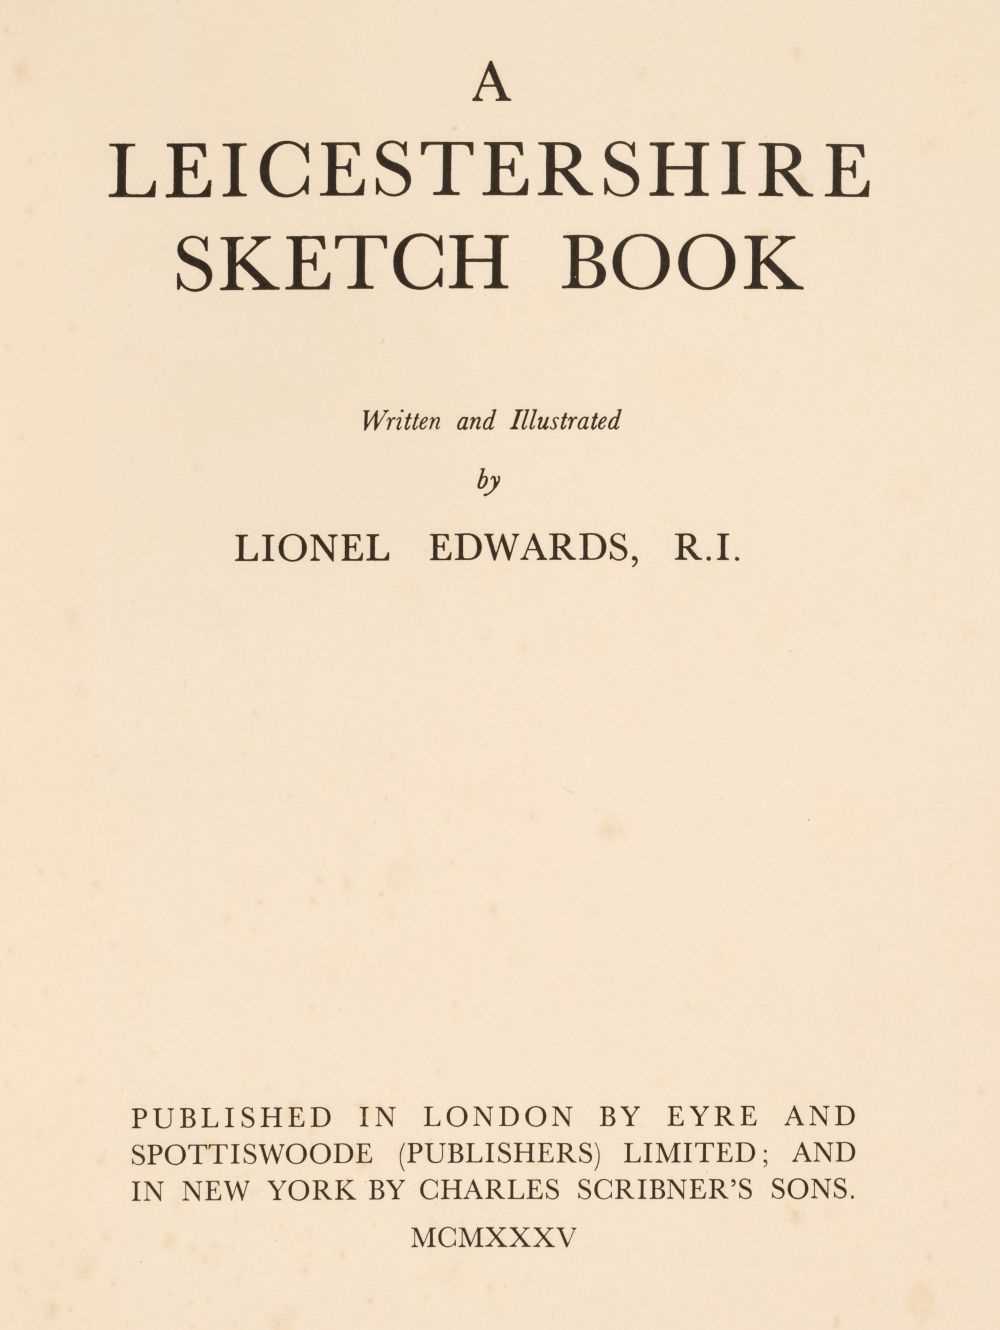 Lot 40 - Edwards (Lionel). A Leicestershire Sketch Book, 1935